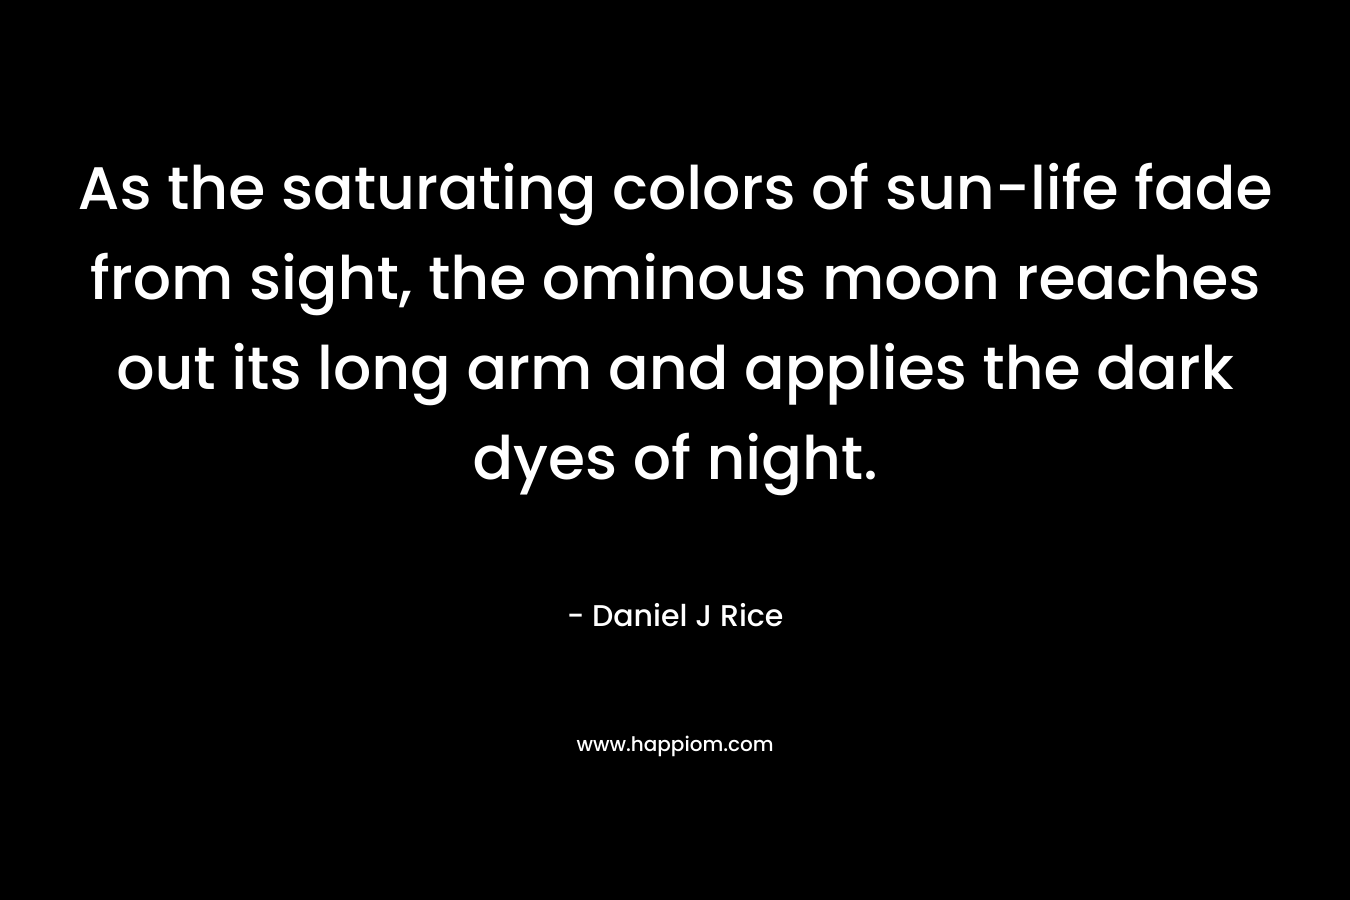 As the saturating colors of sun-life fade from sight, the ominous moon reaches out its long arm and applies the dark dyes of night. – Daniel J Rice